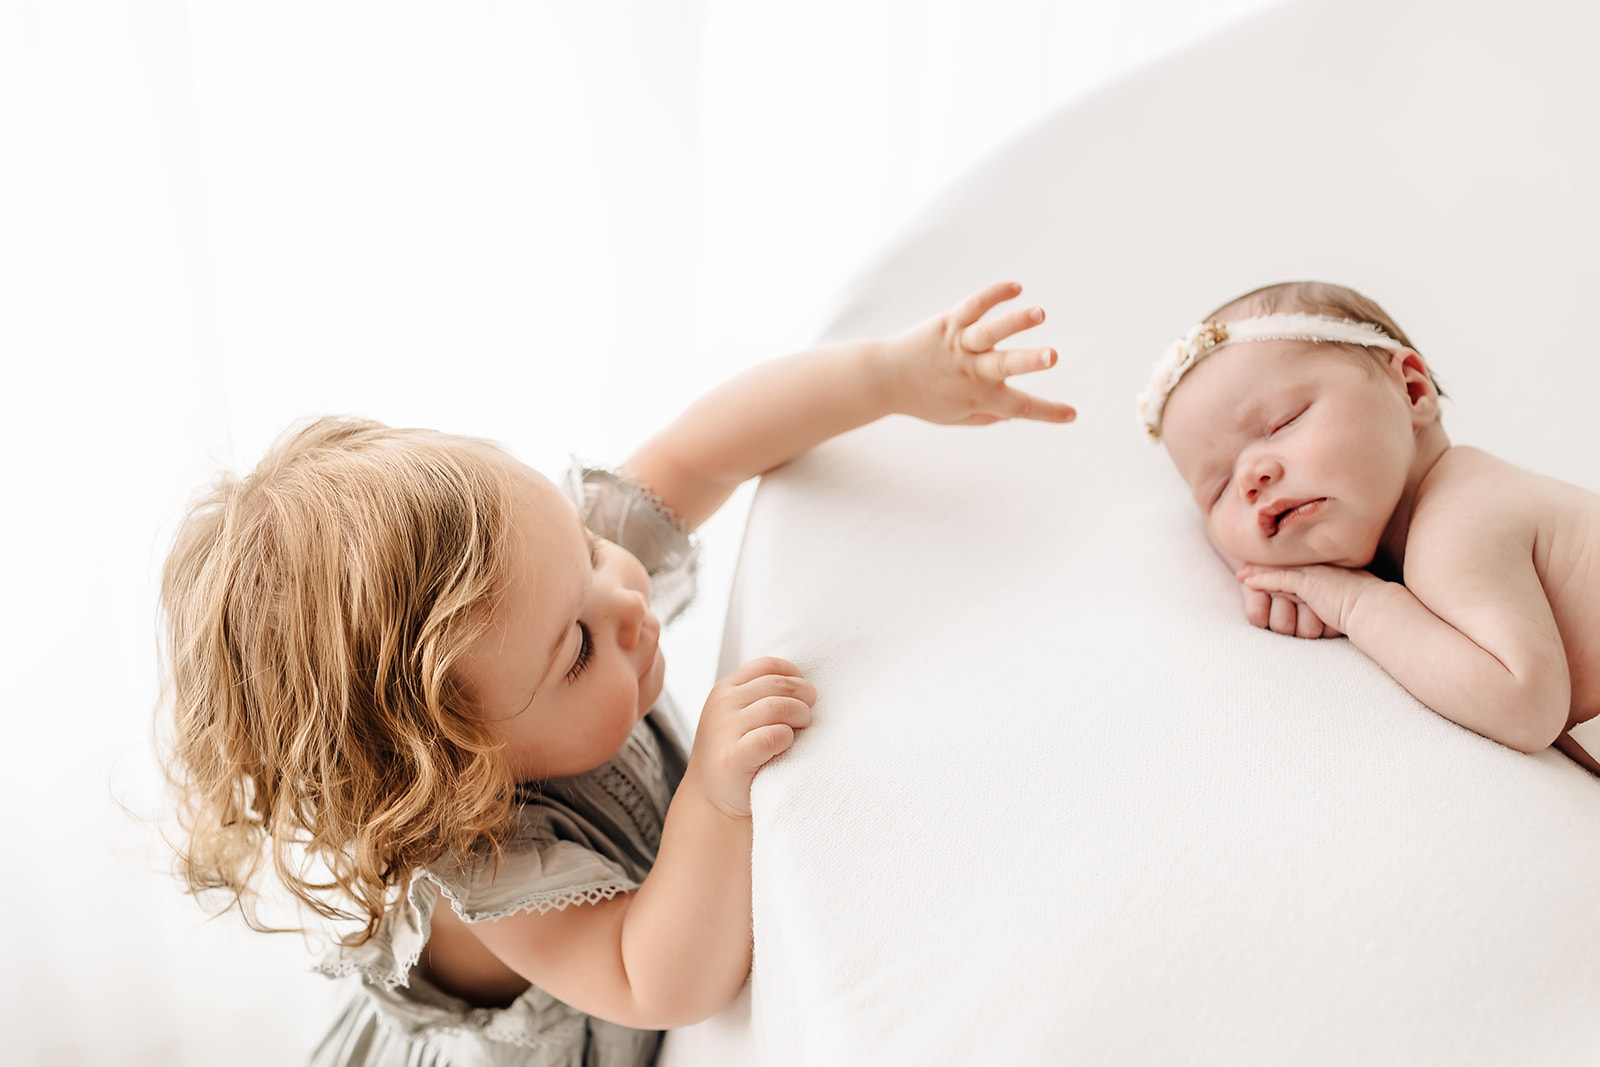 A young girl reaches up to a touch her sleeping newborn baby sibling lake st louis pediatricians